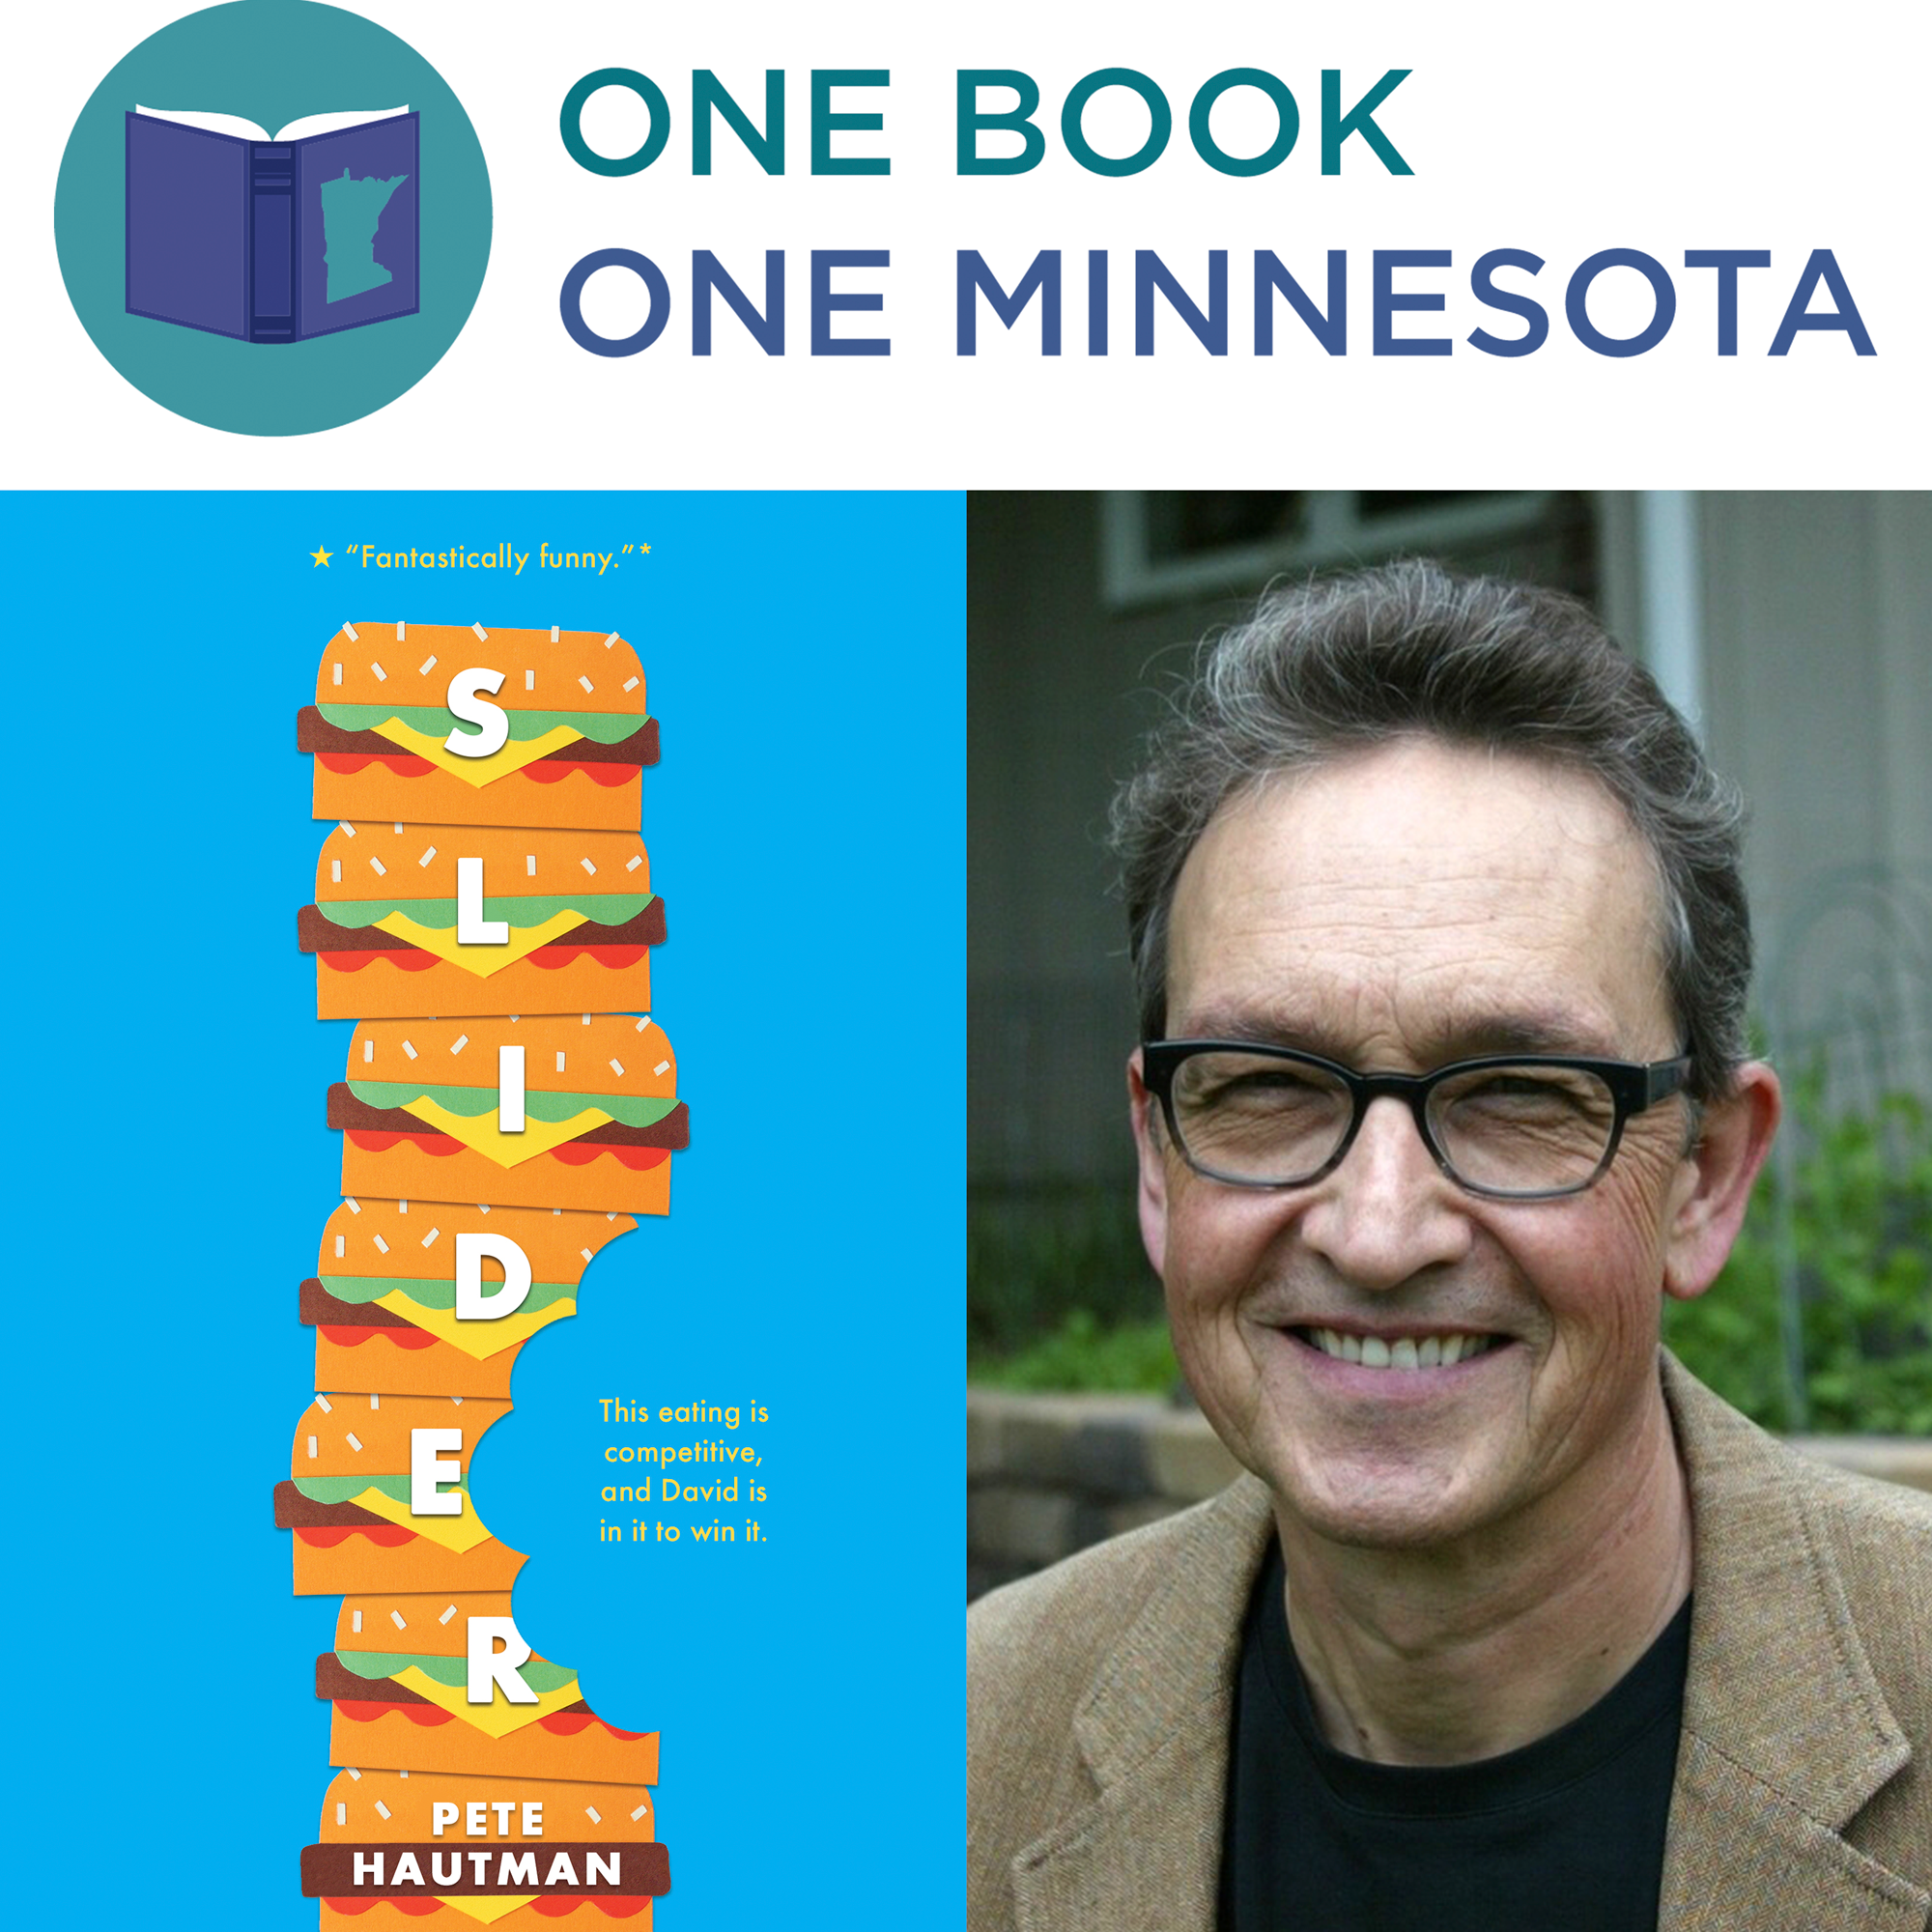 The One Book|One Minnesota logo atop the "Slider" book cover alongside an image of the book's author, Pete Hautman.